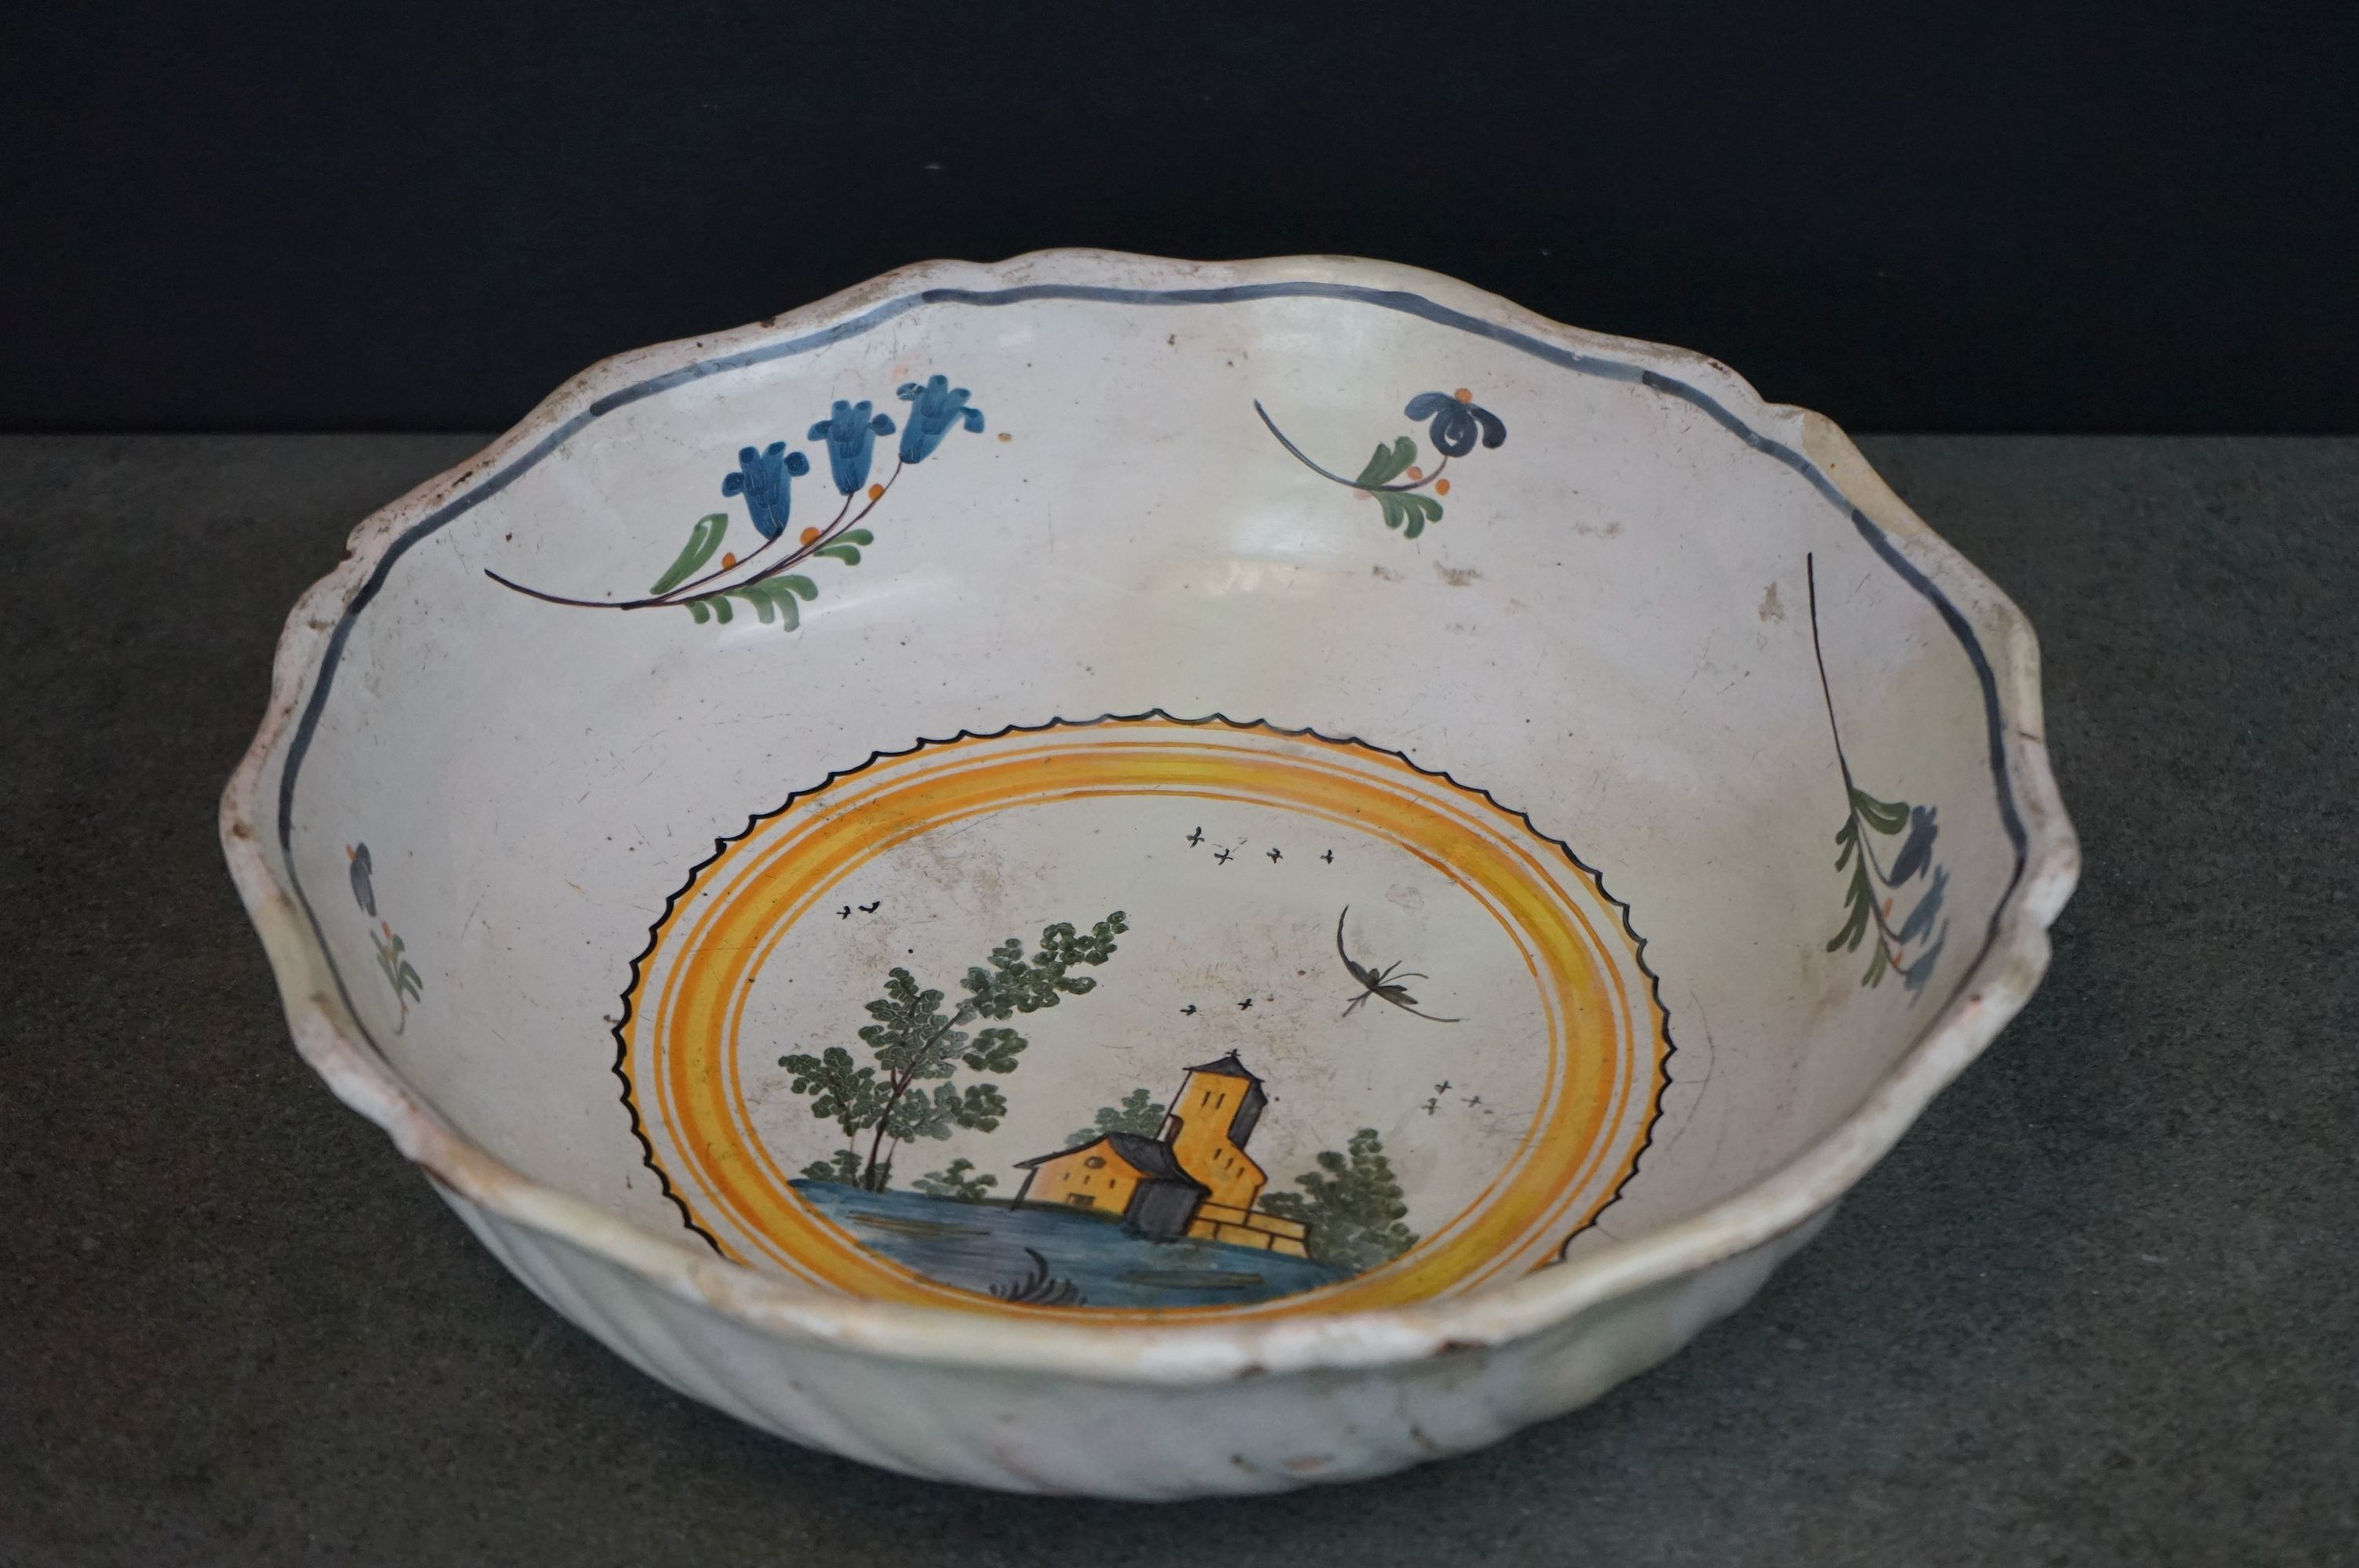 A vintage tin glaze bowl with central scene and floral surround.